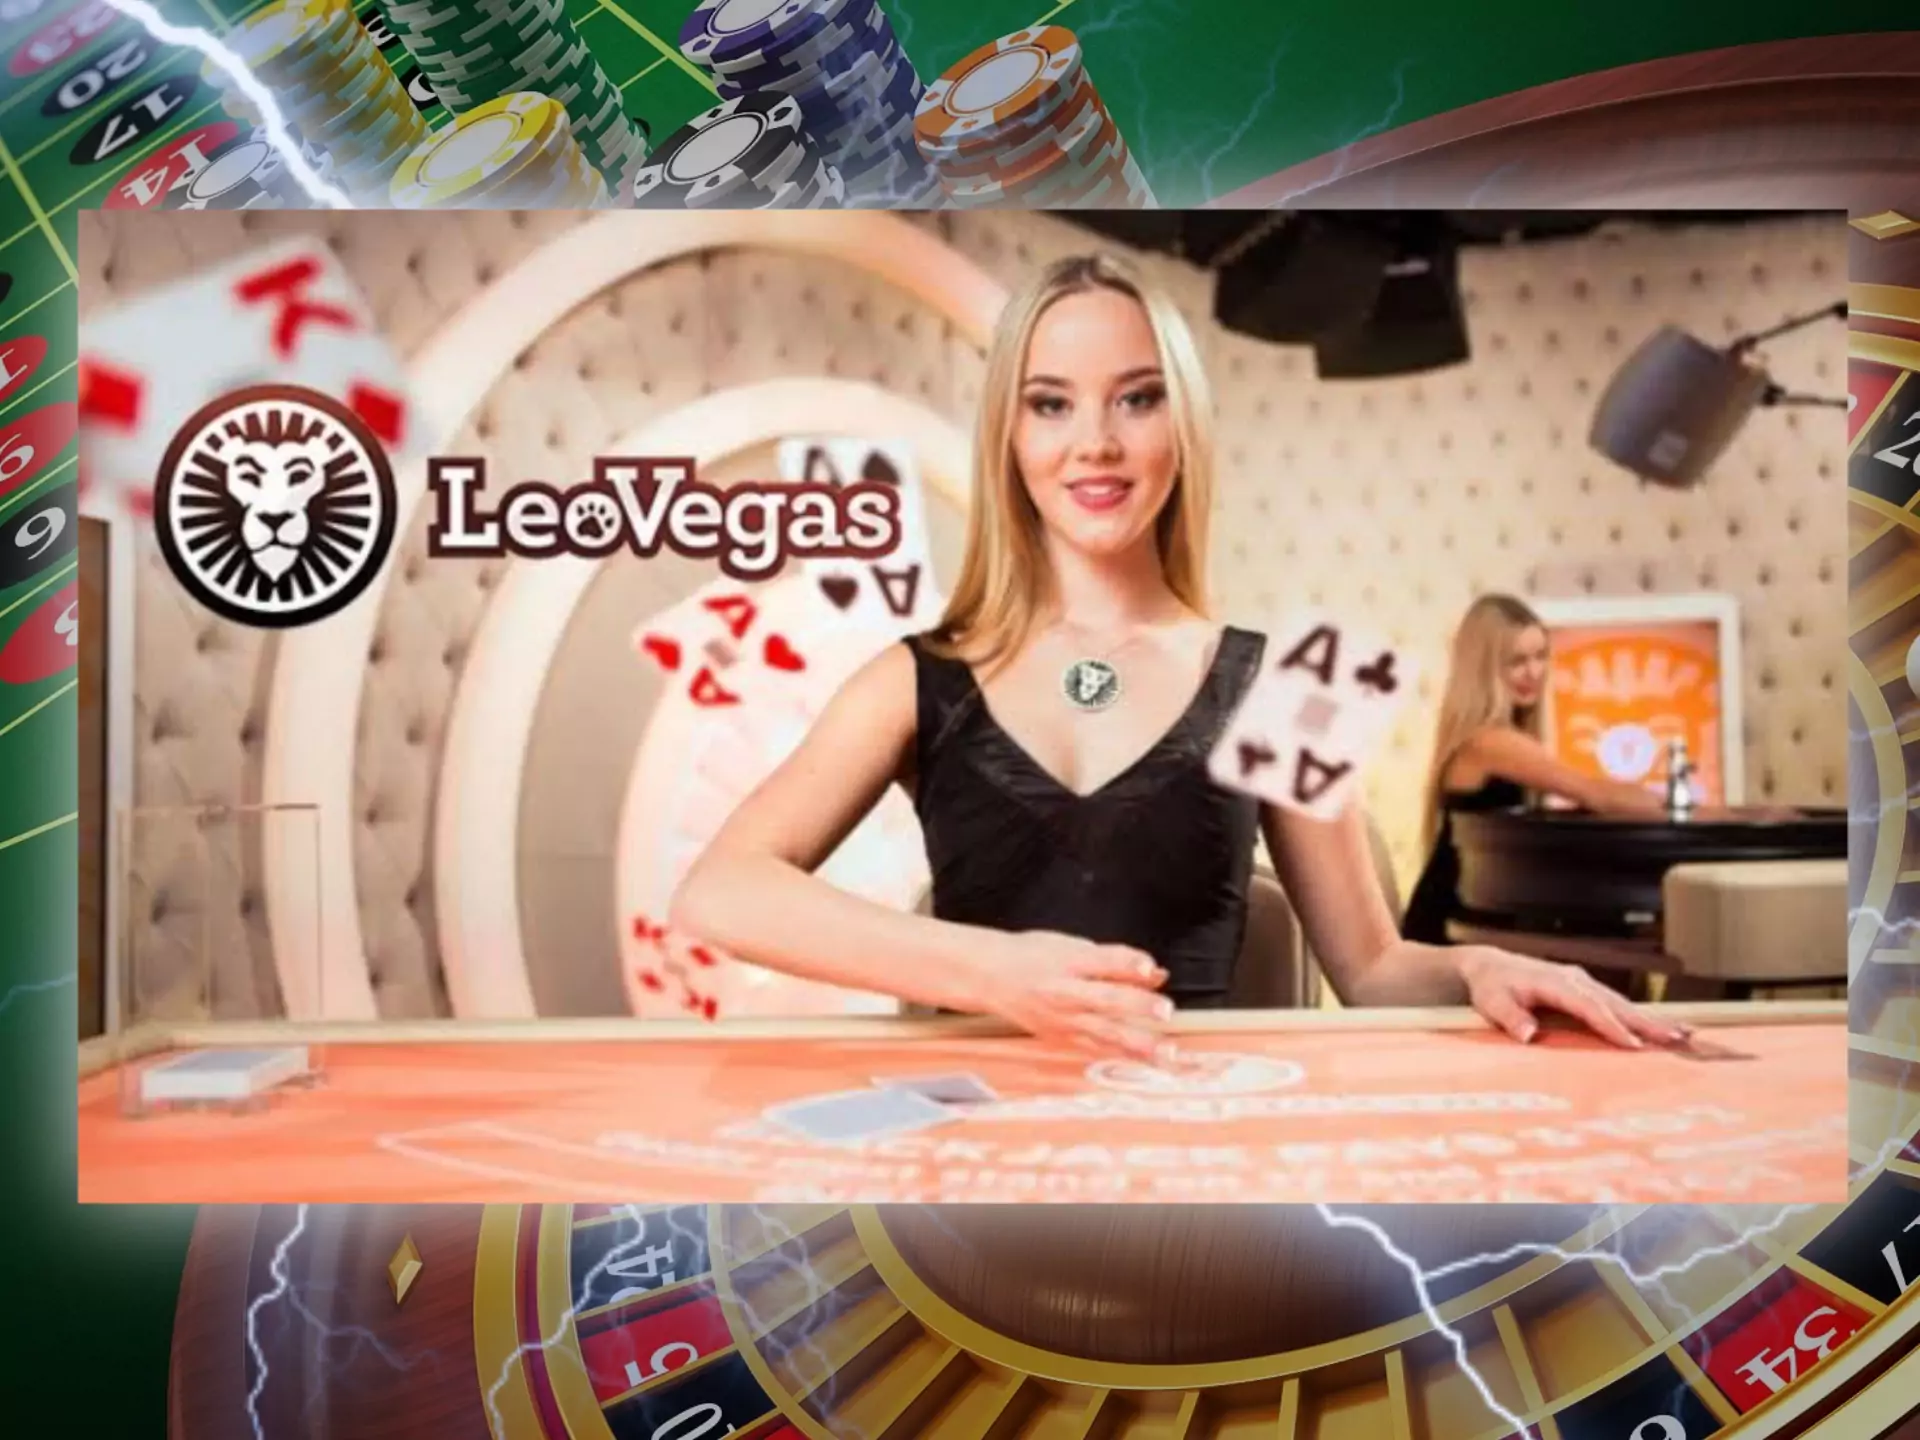 Play live casino games at LeoVegas as if you were at a real offline casino.